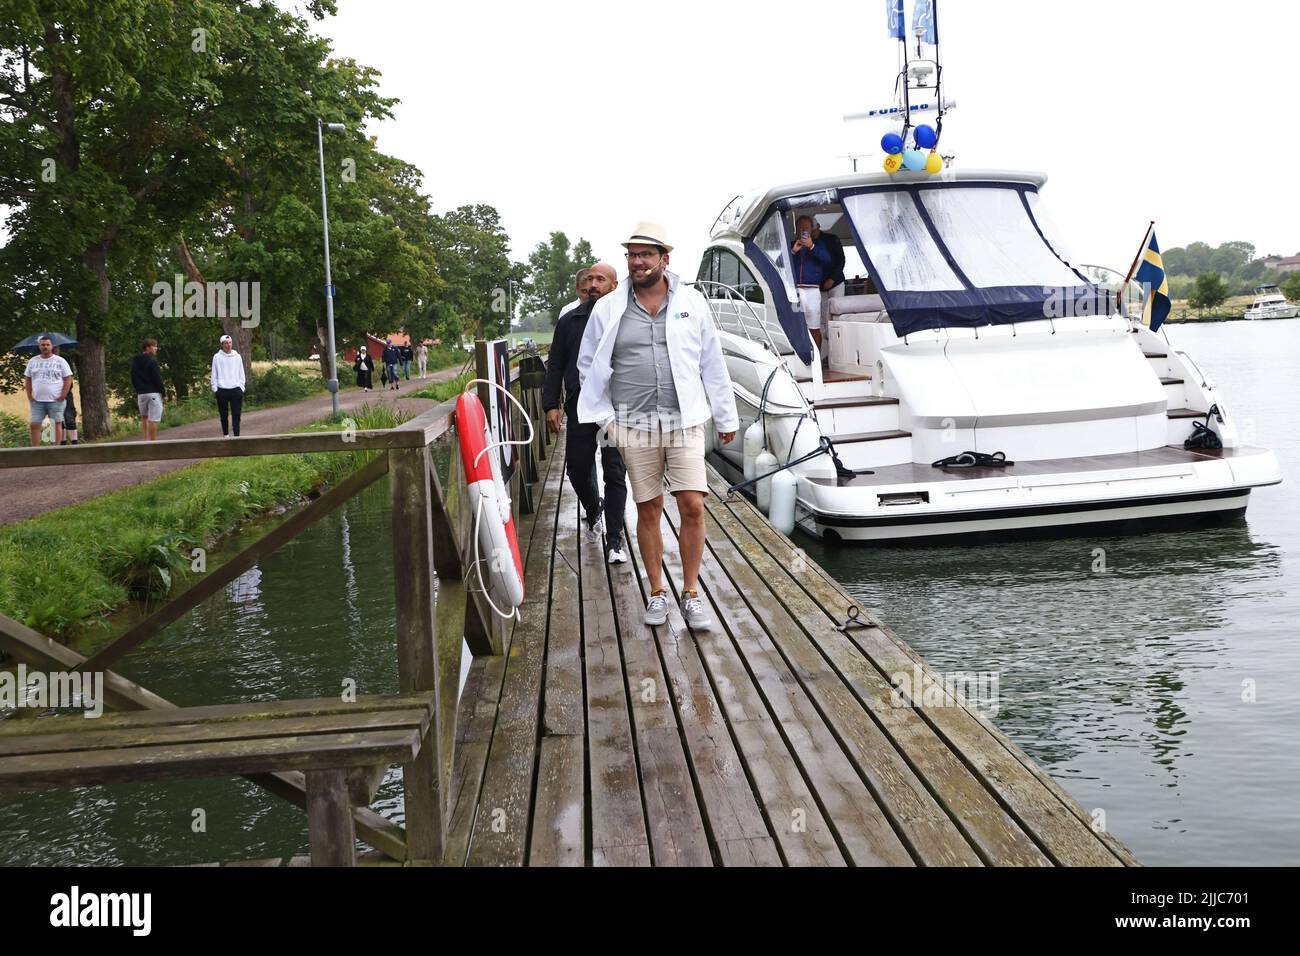 The Sweden Democrats' Jimmie Åkesson starts the 2022 election campaign with a tour on Göta canal. Together with the Riksdag candidate Jessica Stegrud, they will go by boat along the canal and stop to meet voters, present new developments and have interesting conversations. Stock Photo